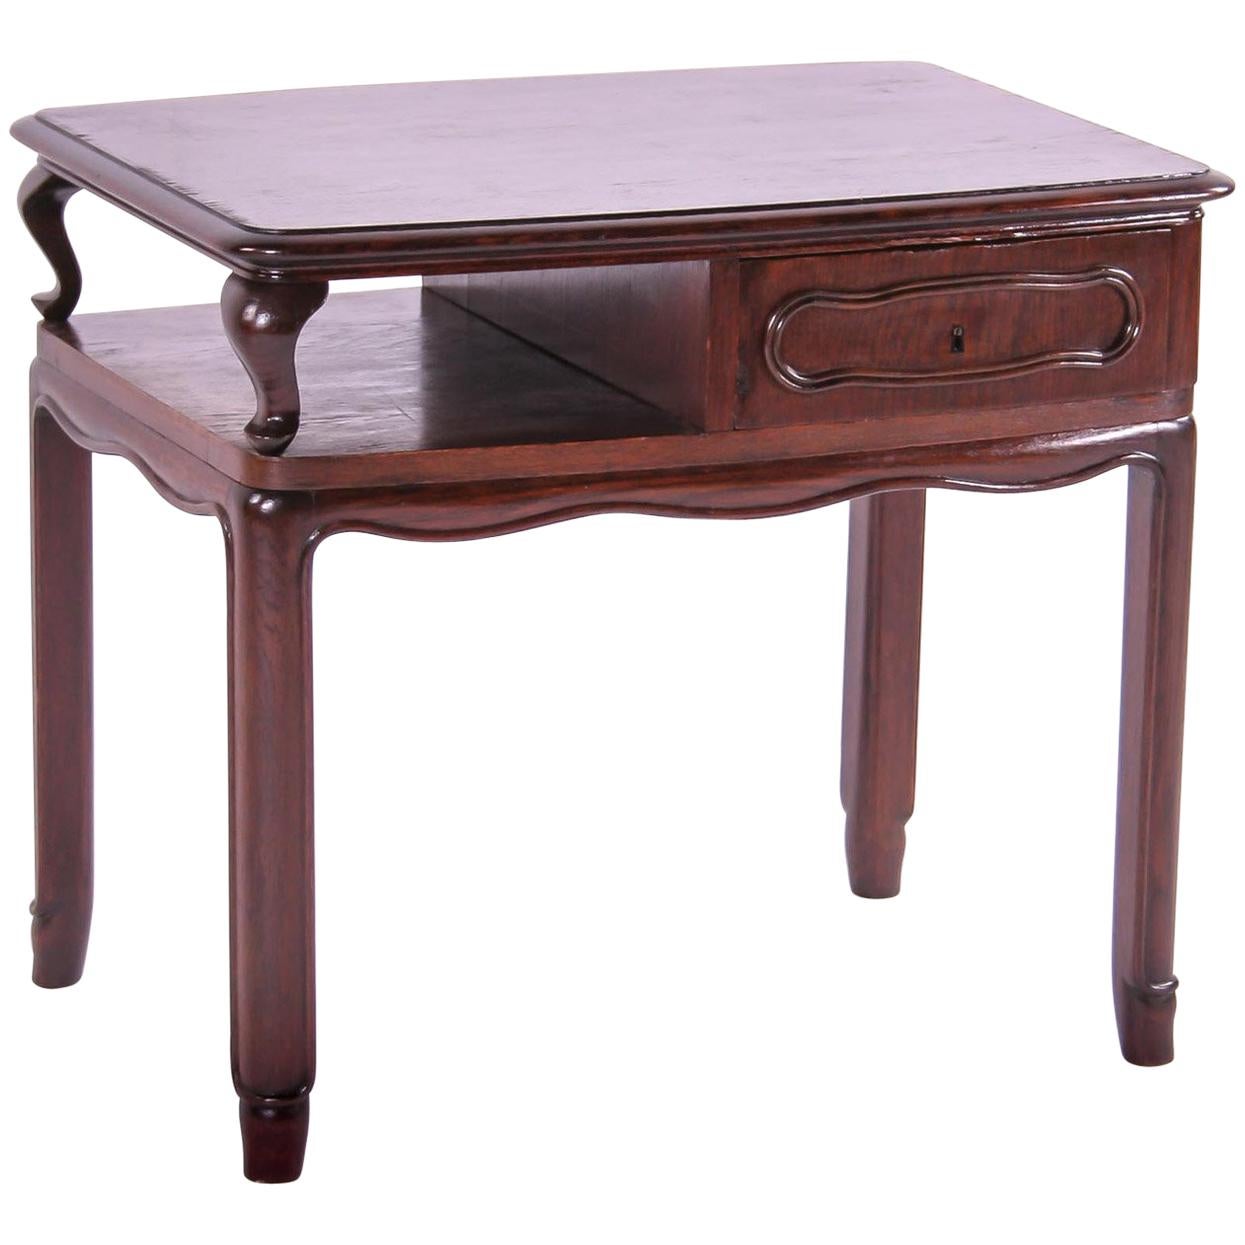 Czech Historism Design Table with Storage and Drawer For Sale